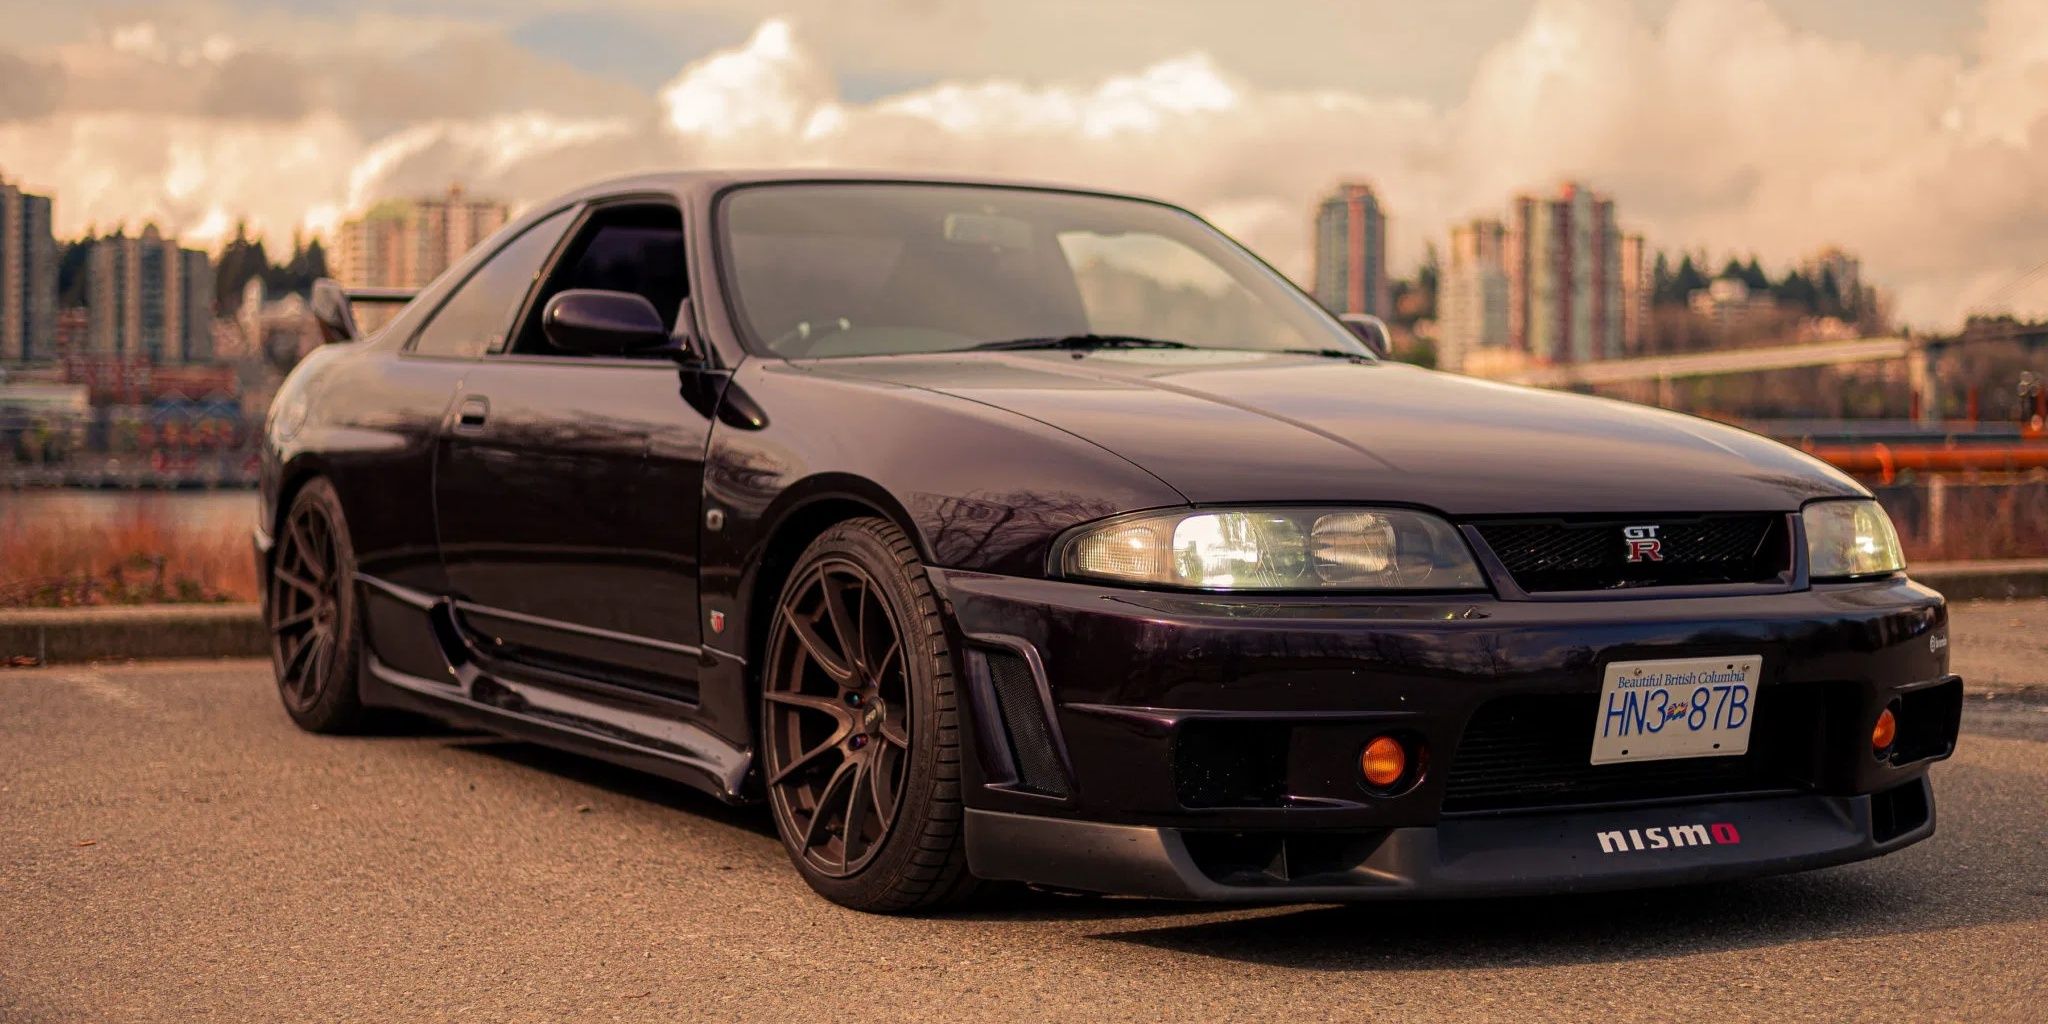 A black 1993 Nissan Skyline GTR R33 pictured against a city backdrop